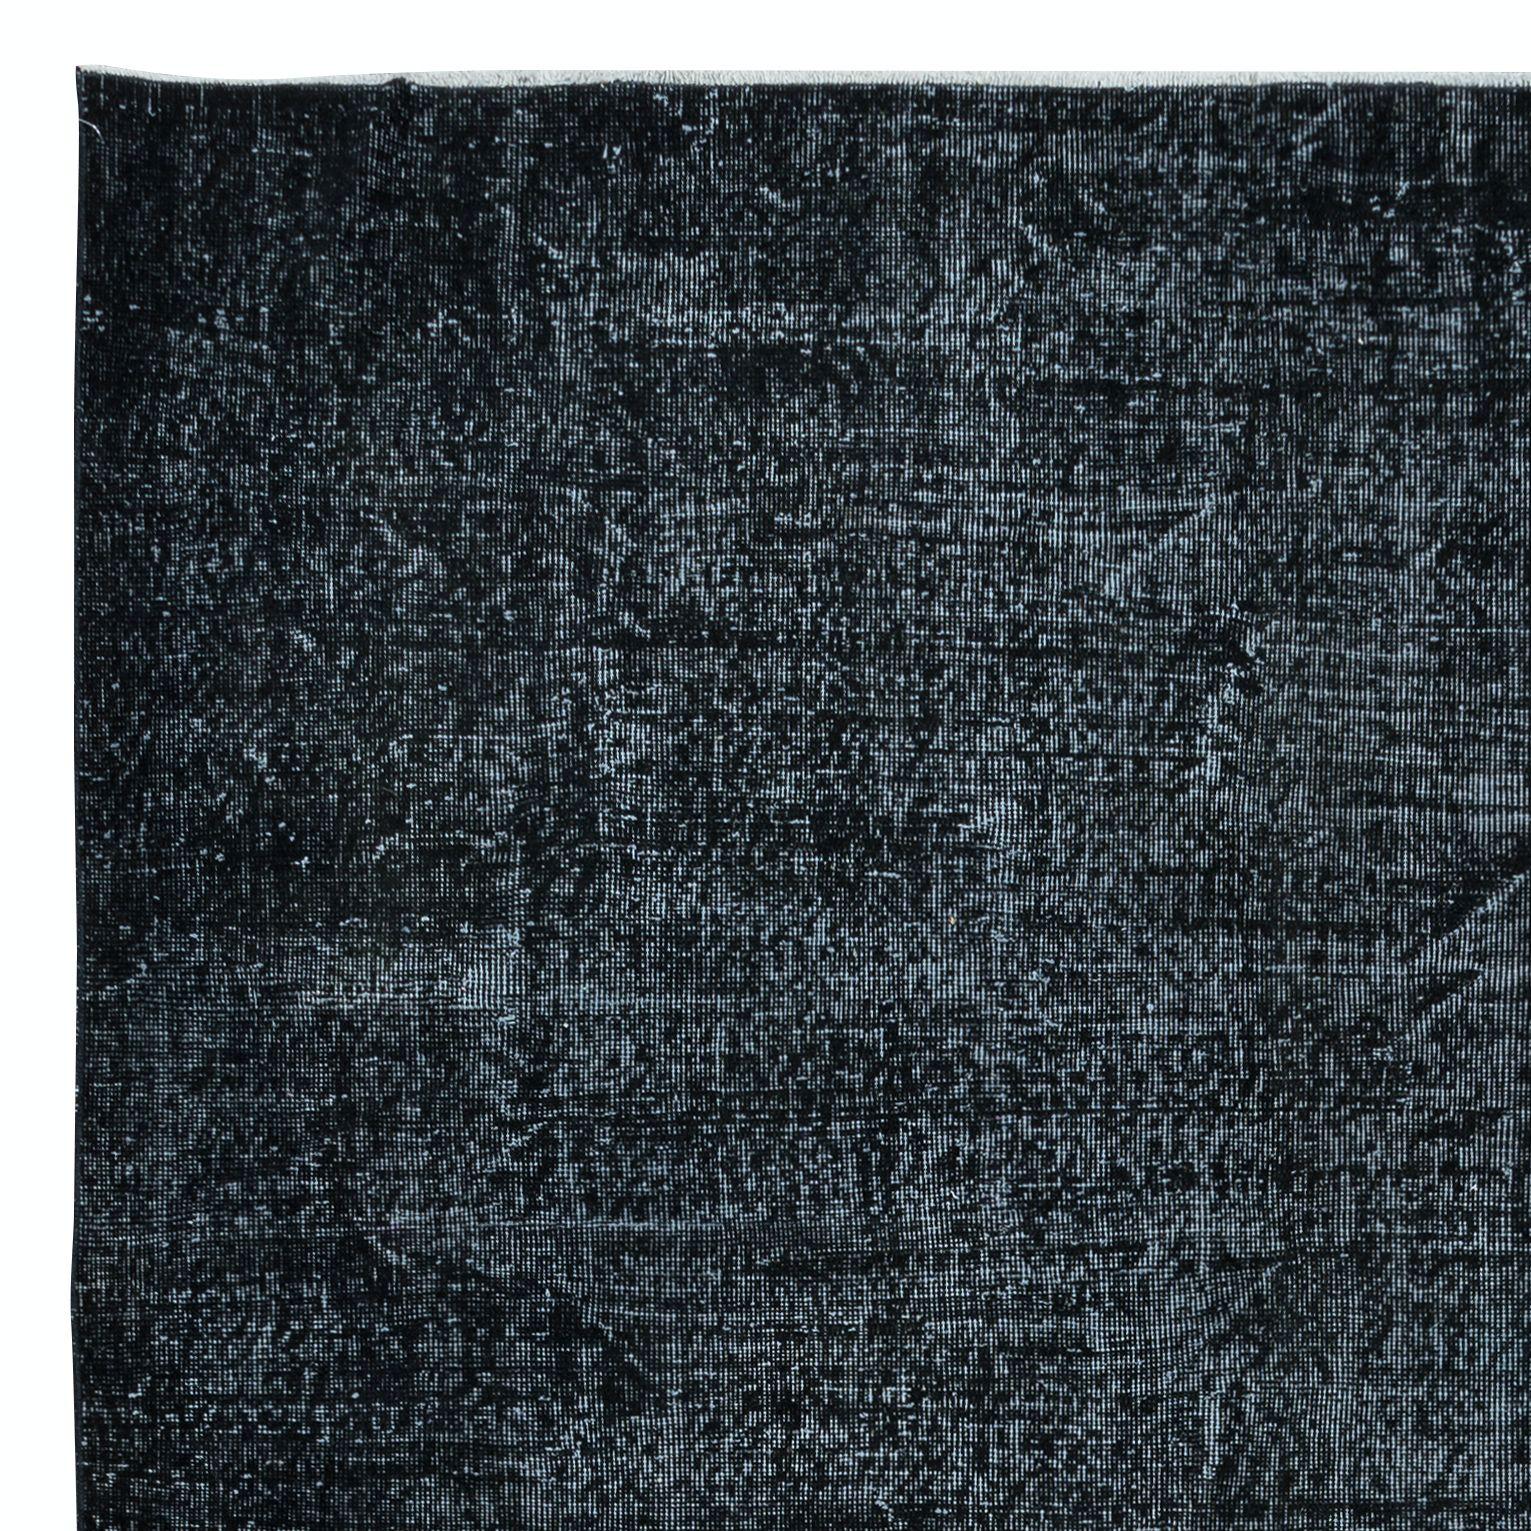 Hand-Woven 7x10.2 Ft Modern Black Area Rug, Handwoven and Handknotted in Isparta, Turkey For Sale